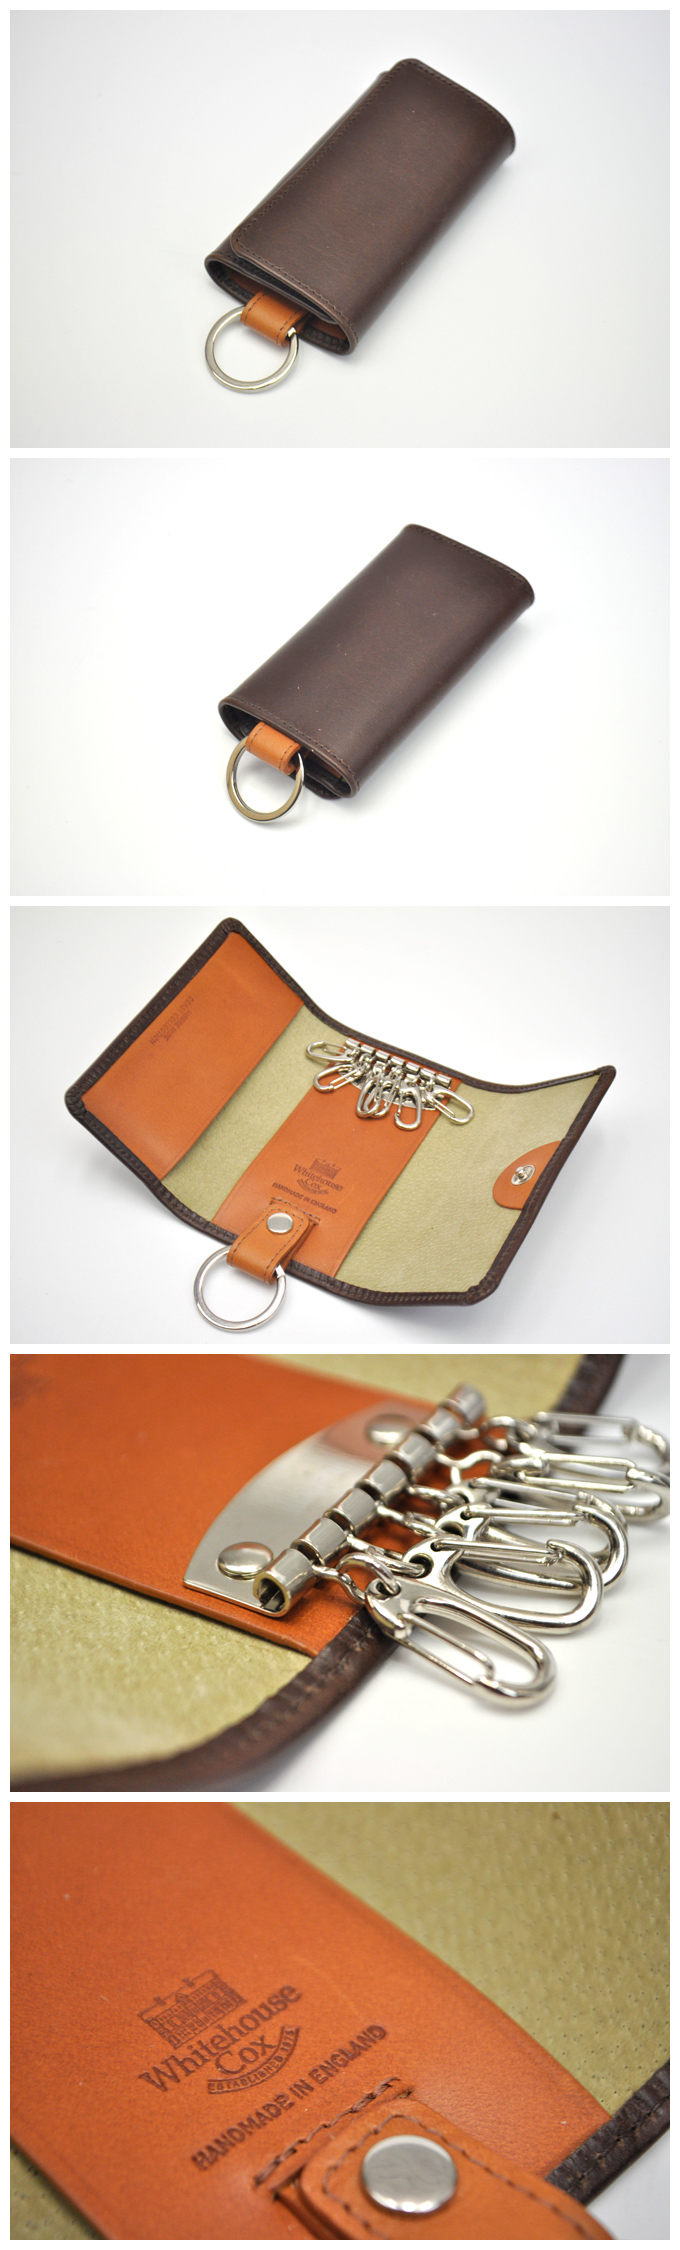 Whitehouse Cox 【Derby Collection】S-9692 Key Case